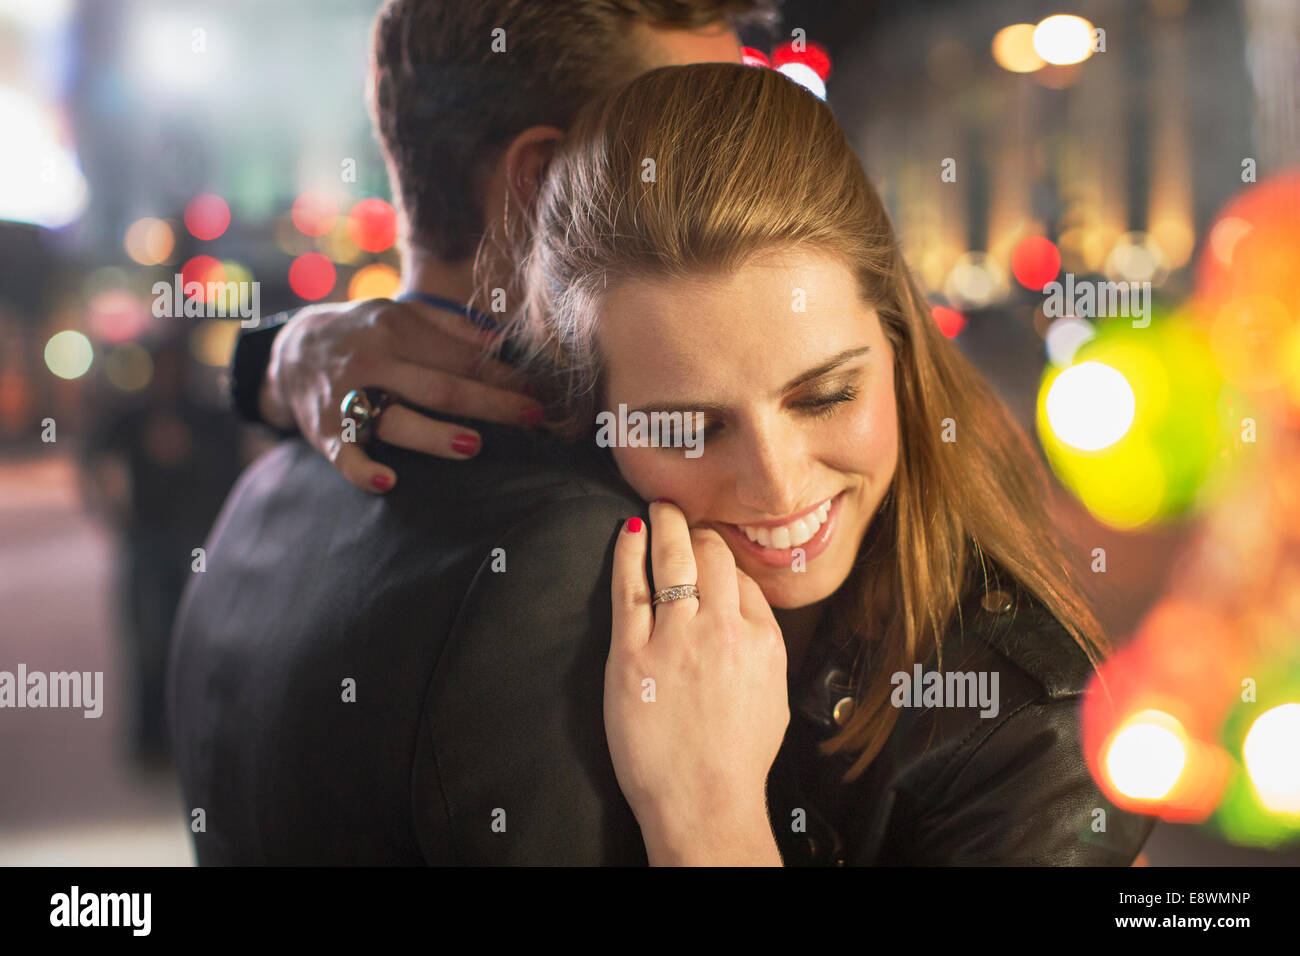 Couple hugging on city street at night Banque D'Images